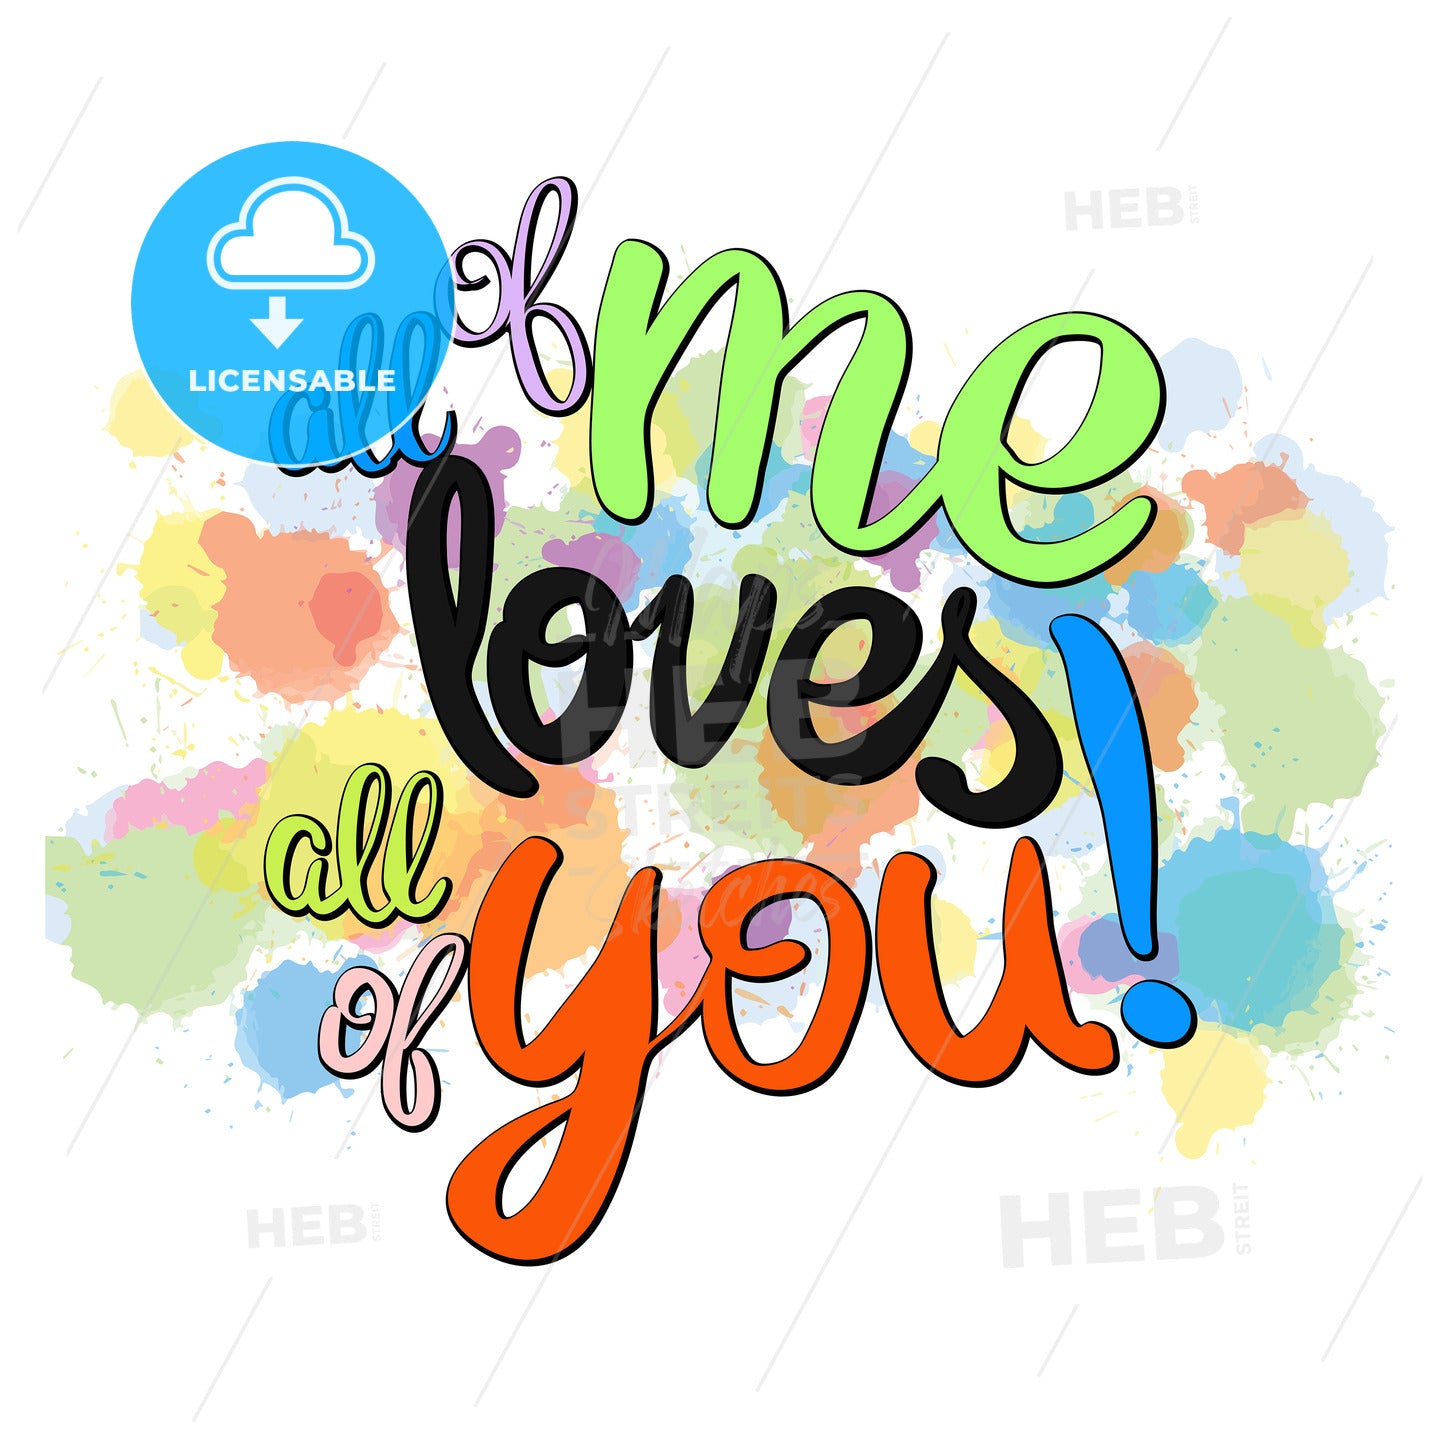 All of me loves all of you written phrase – instant download